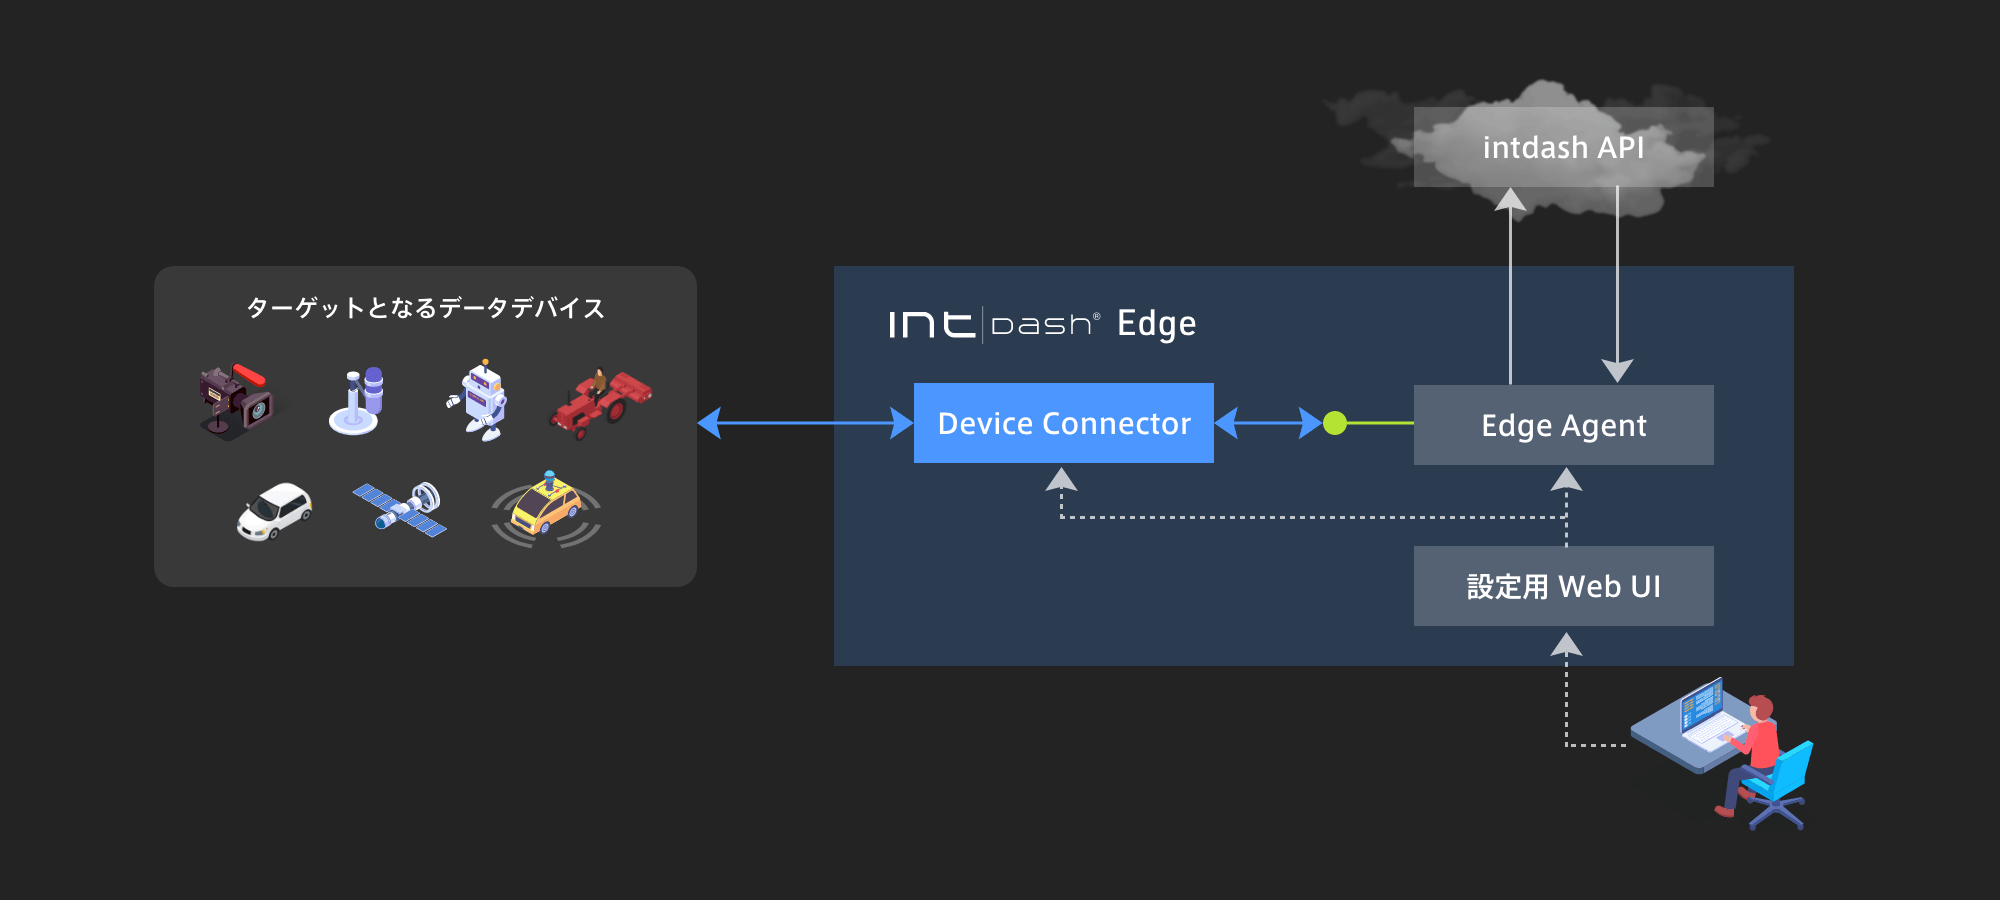 https://www.aptpod.co.jp/img/products/intdash/intdash-device-connecter.png